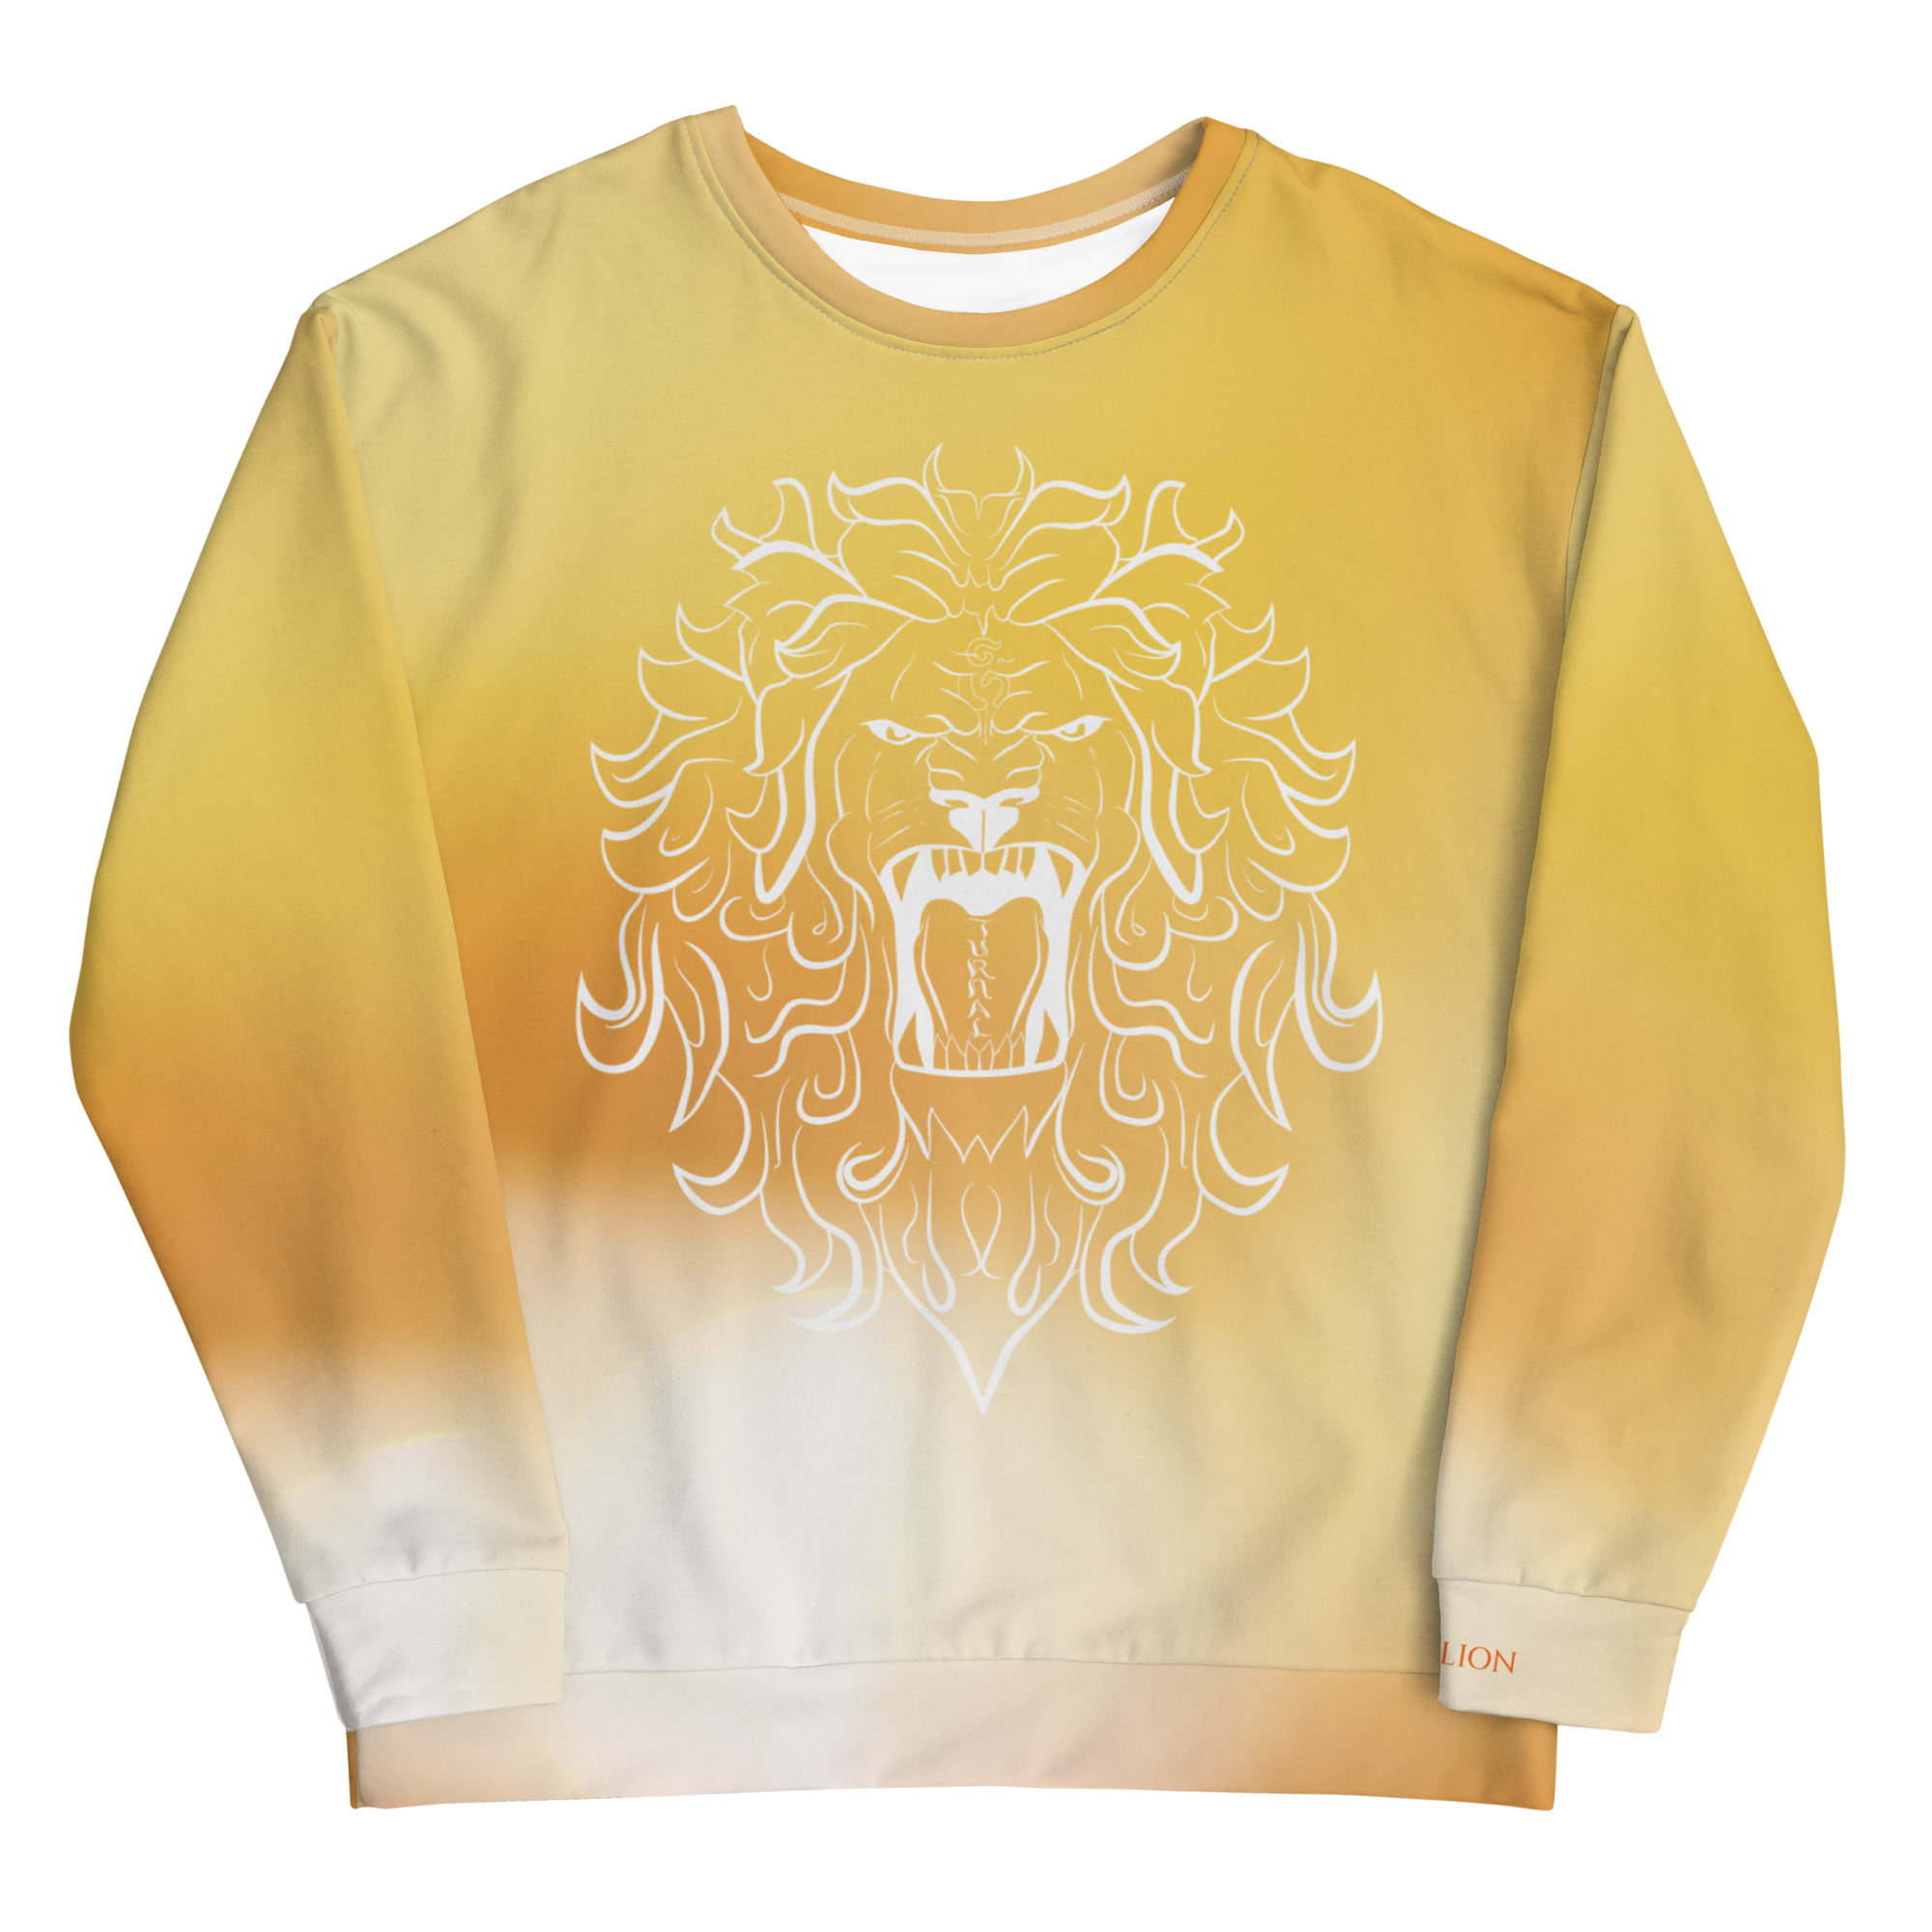 all-over-print-recycled-unisex-sweatshirt-white-front-65483f5a058f5.jpg